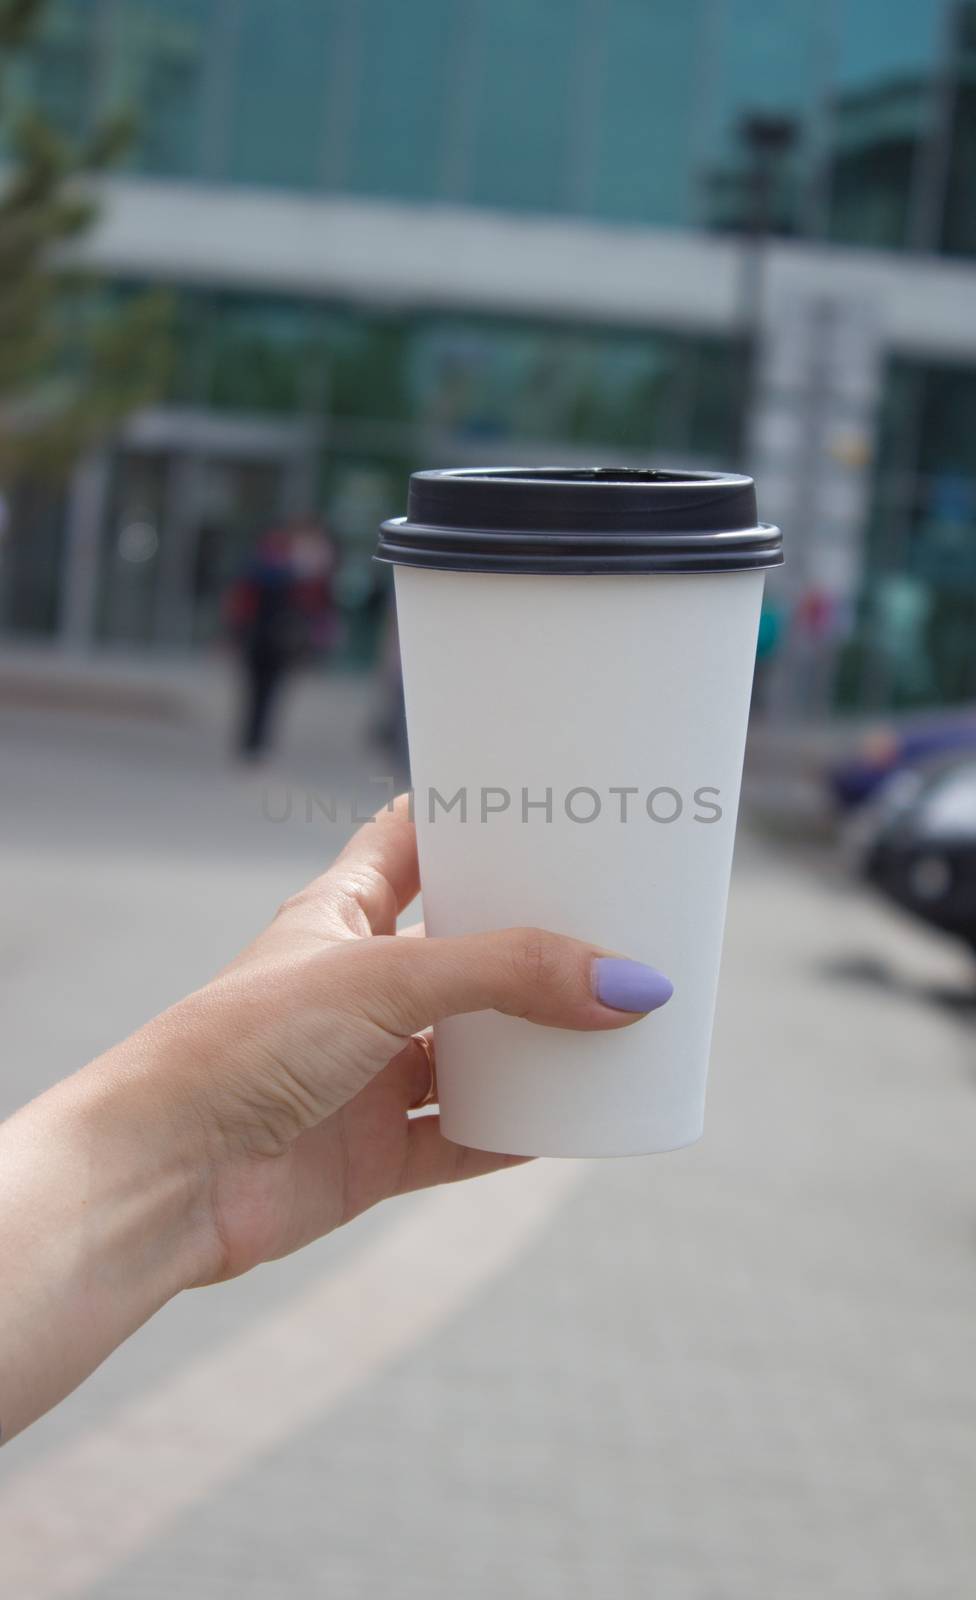 Breakfast and coffee theme: a woman's hand holding a white paper coffee Cup with a black plastic lid. by AnatoliiFoto